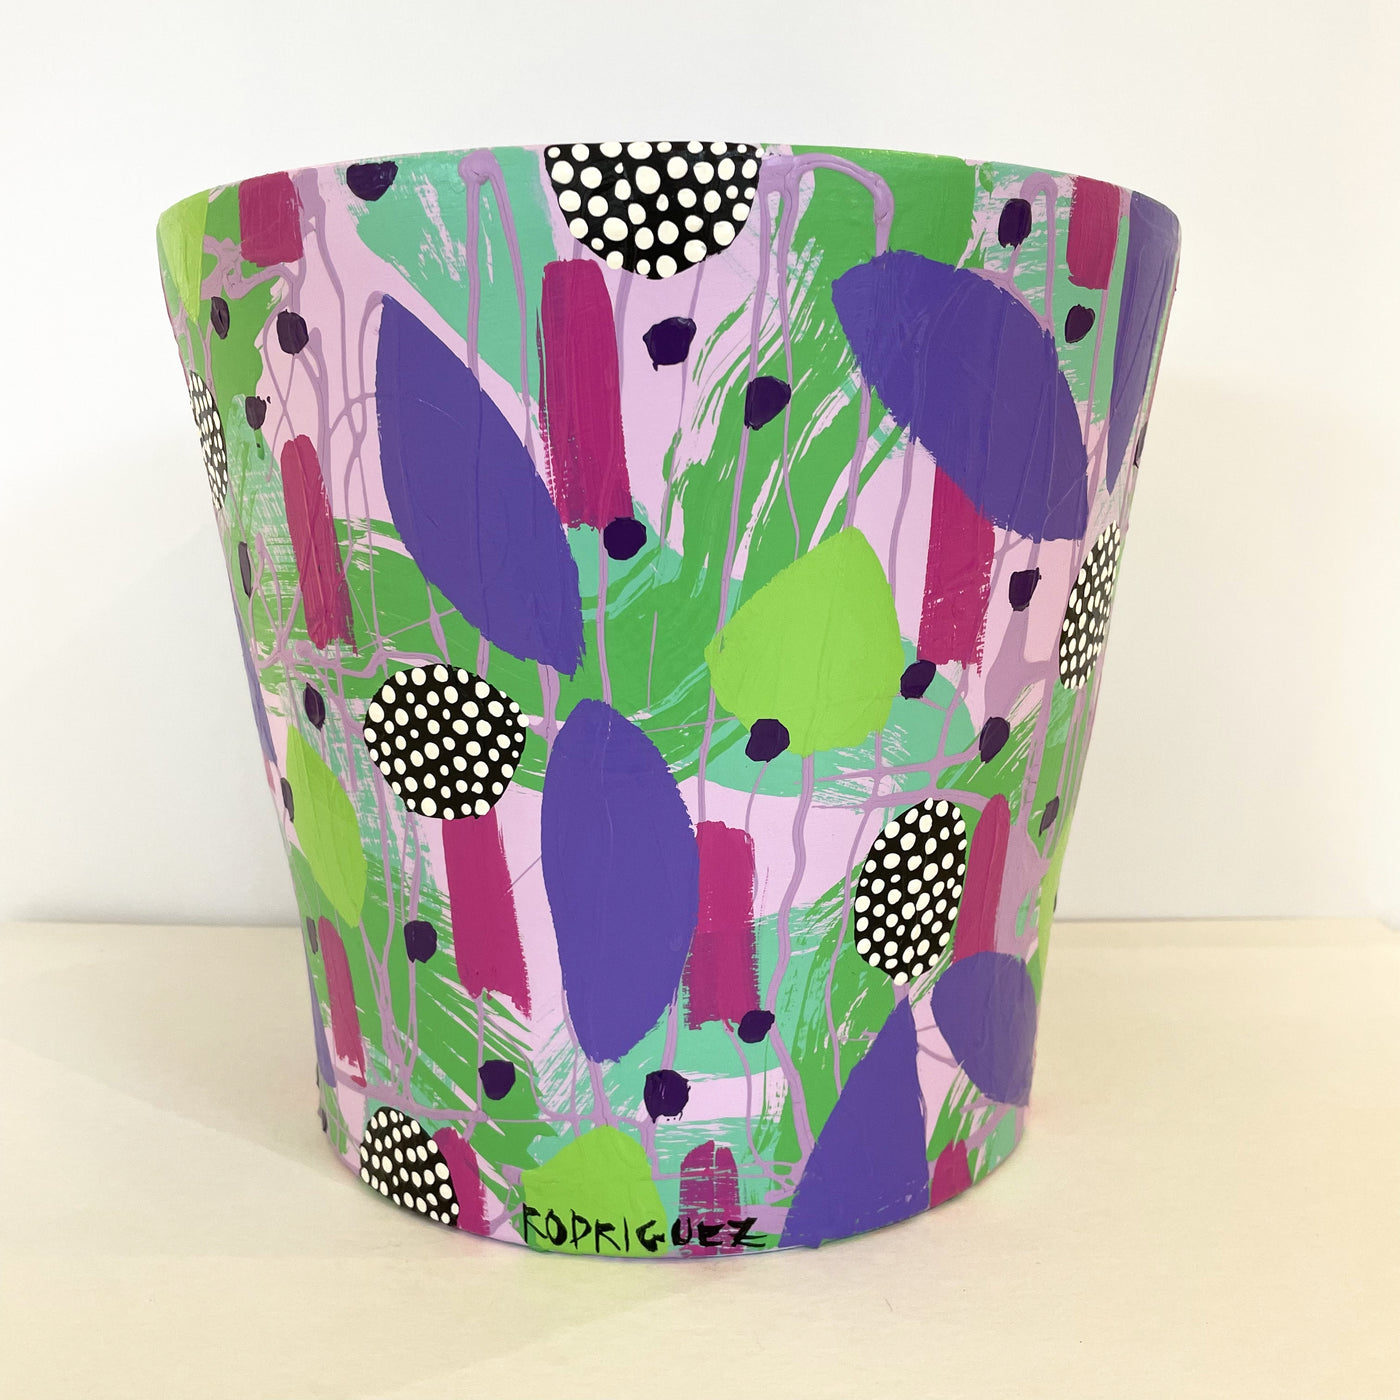 LOUISE - ABSTRACT PLANTER - EXTRA LARGE